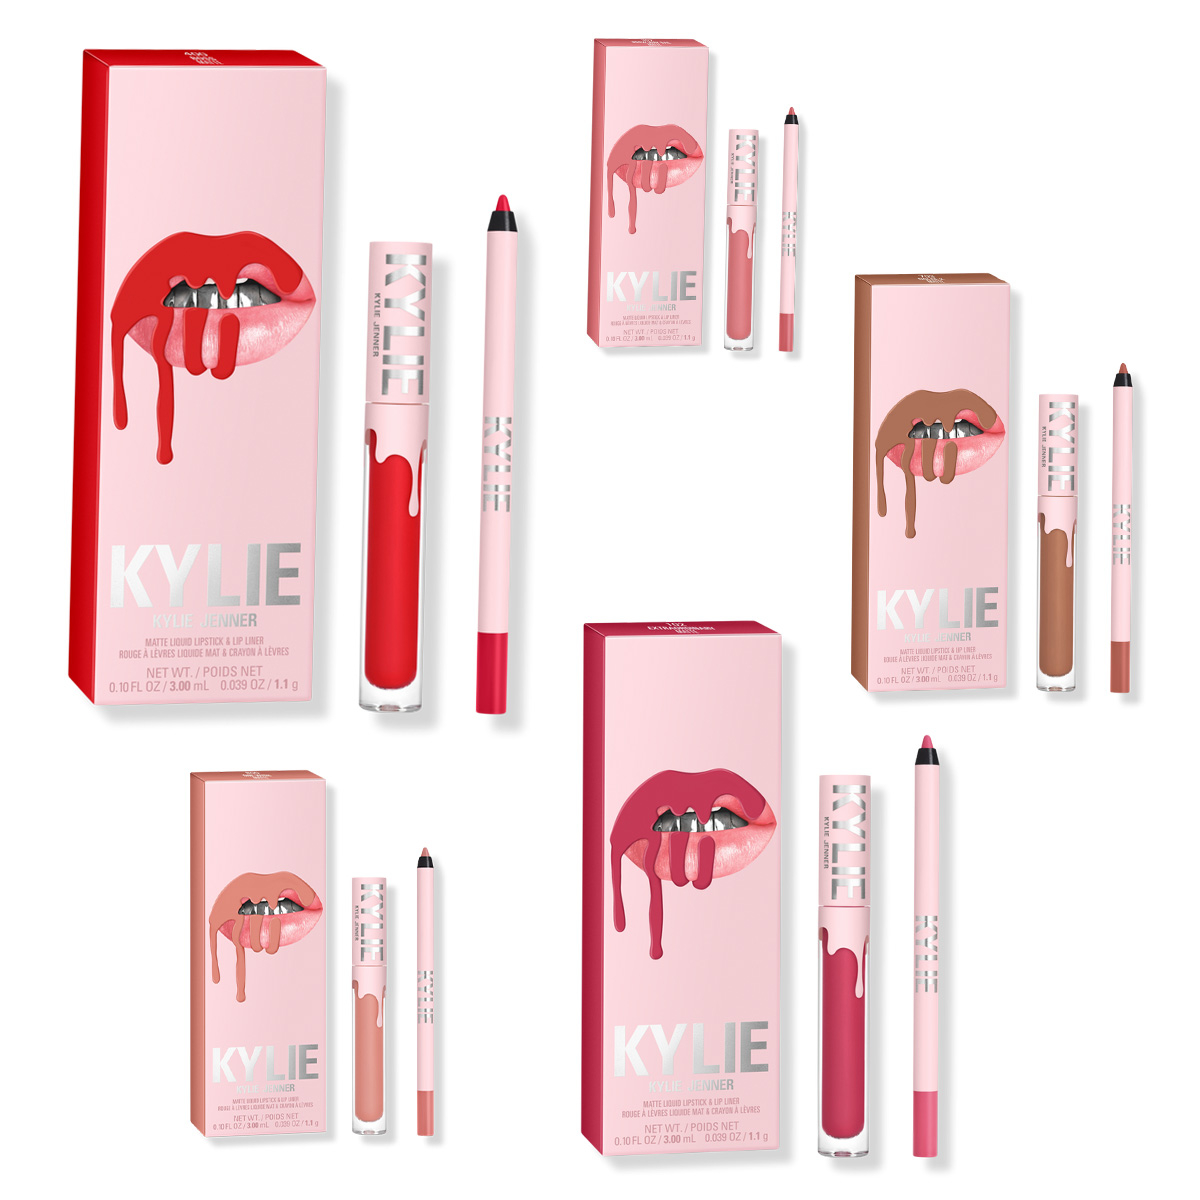 Don't Miss This Kylie Cosmetics Flash Deal: Buy 1 Lip Kit, Get 1 Free